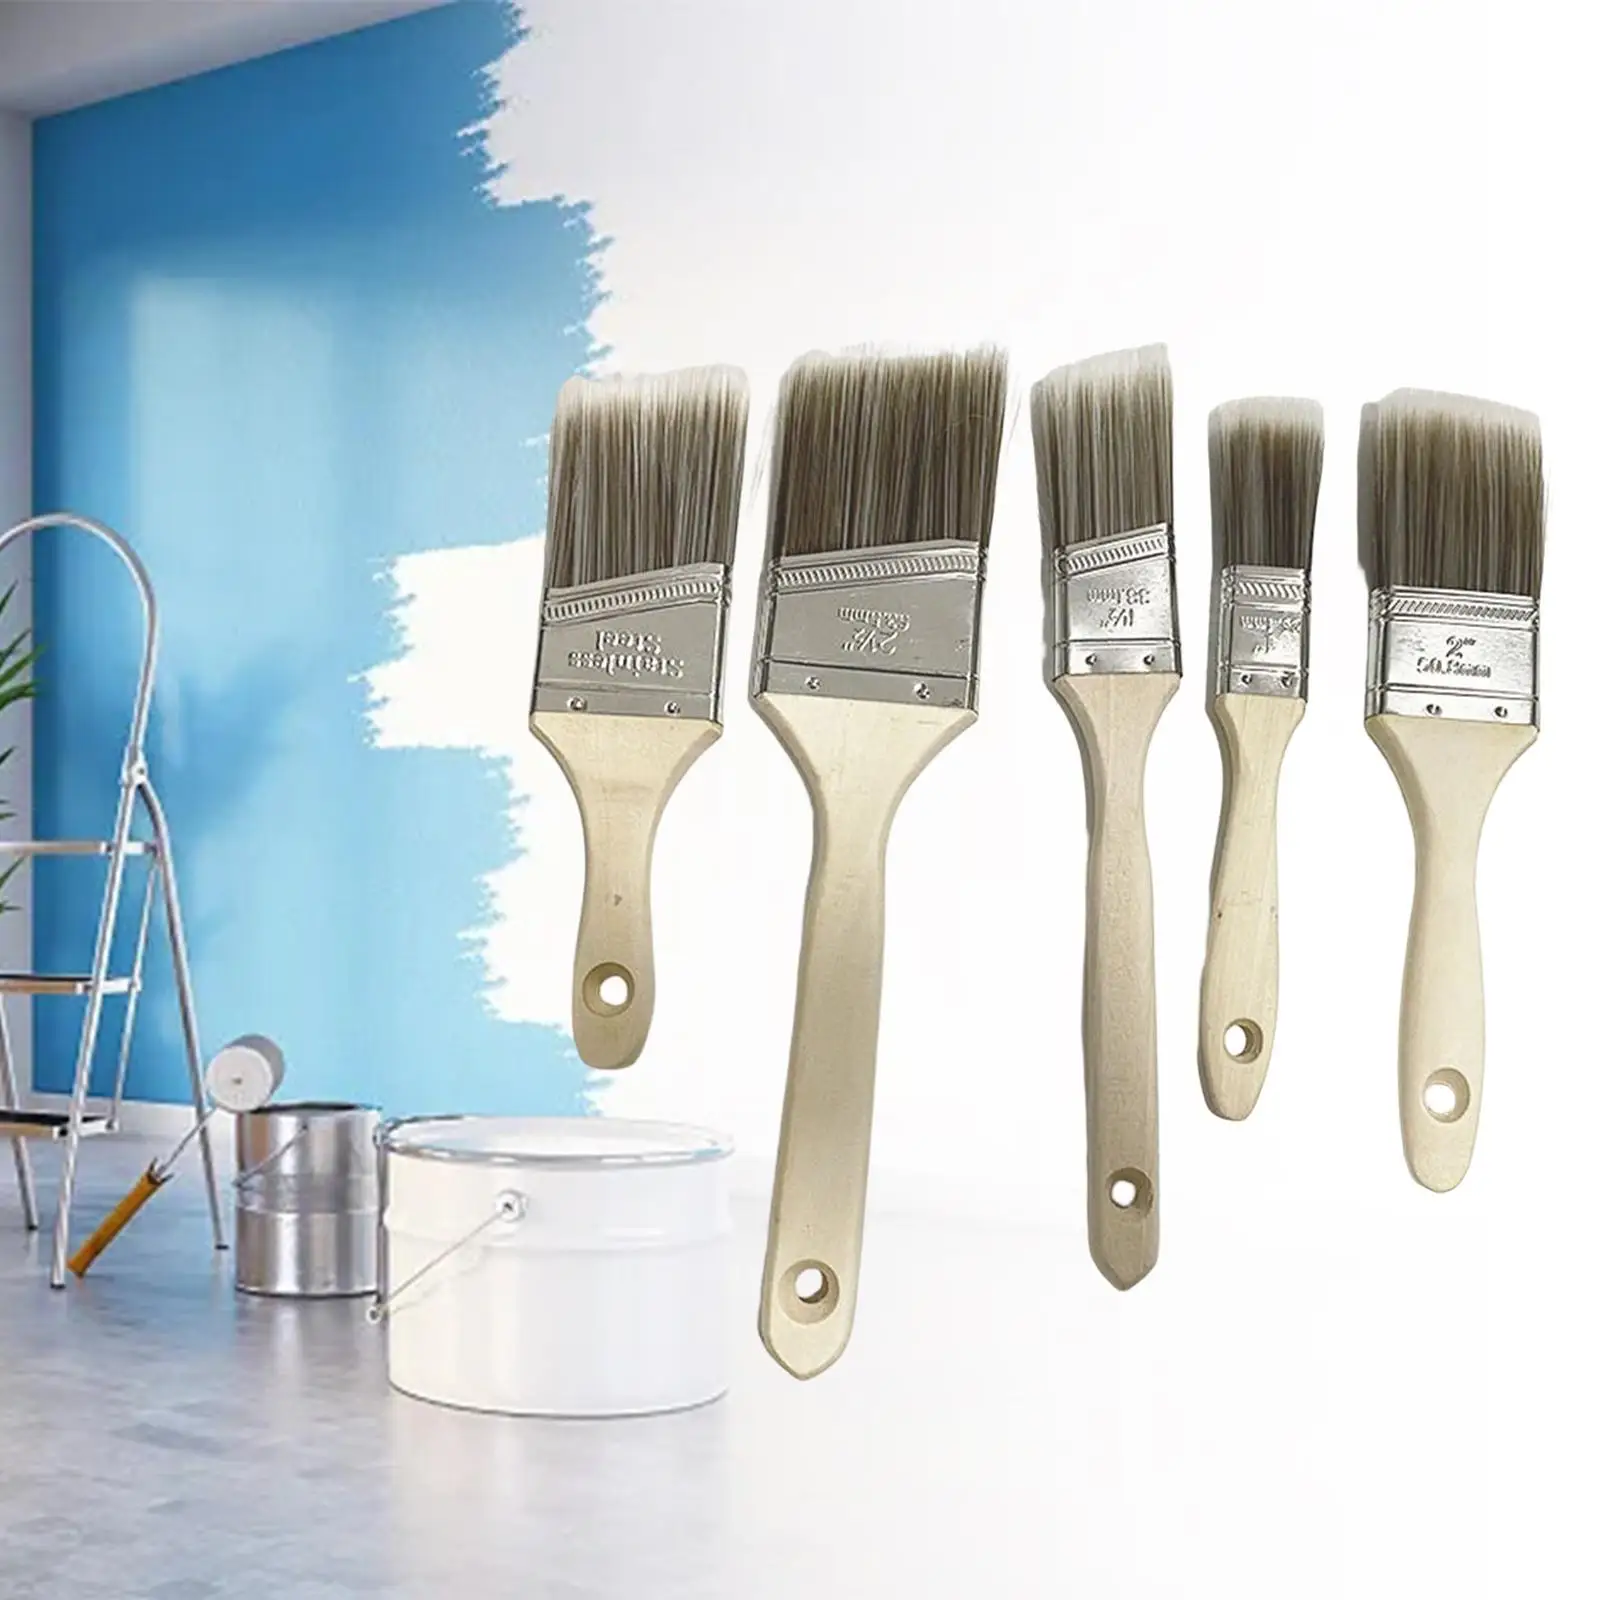 5x Paint Brushes Variety Angle Art Paint Brushes Wooden Handle Brushes corners Cabinets Outdoor Decks Crafts Bathrooms